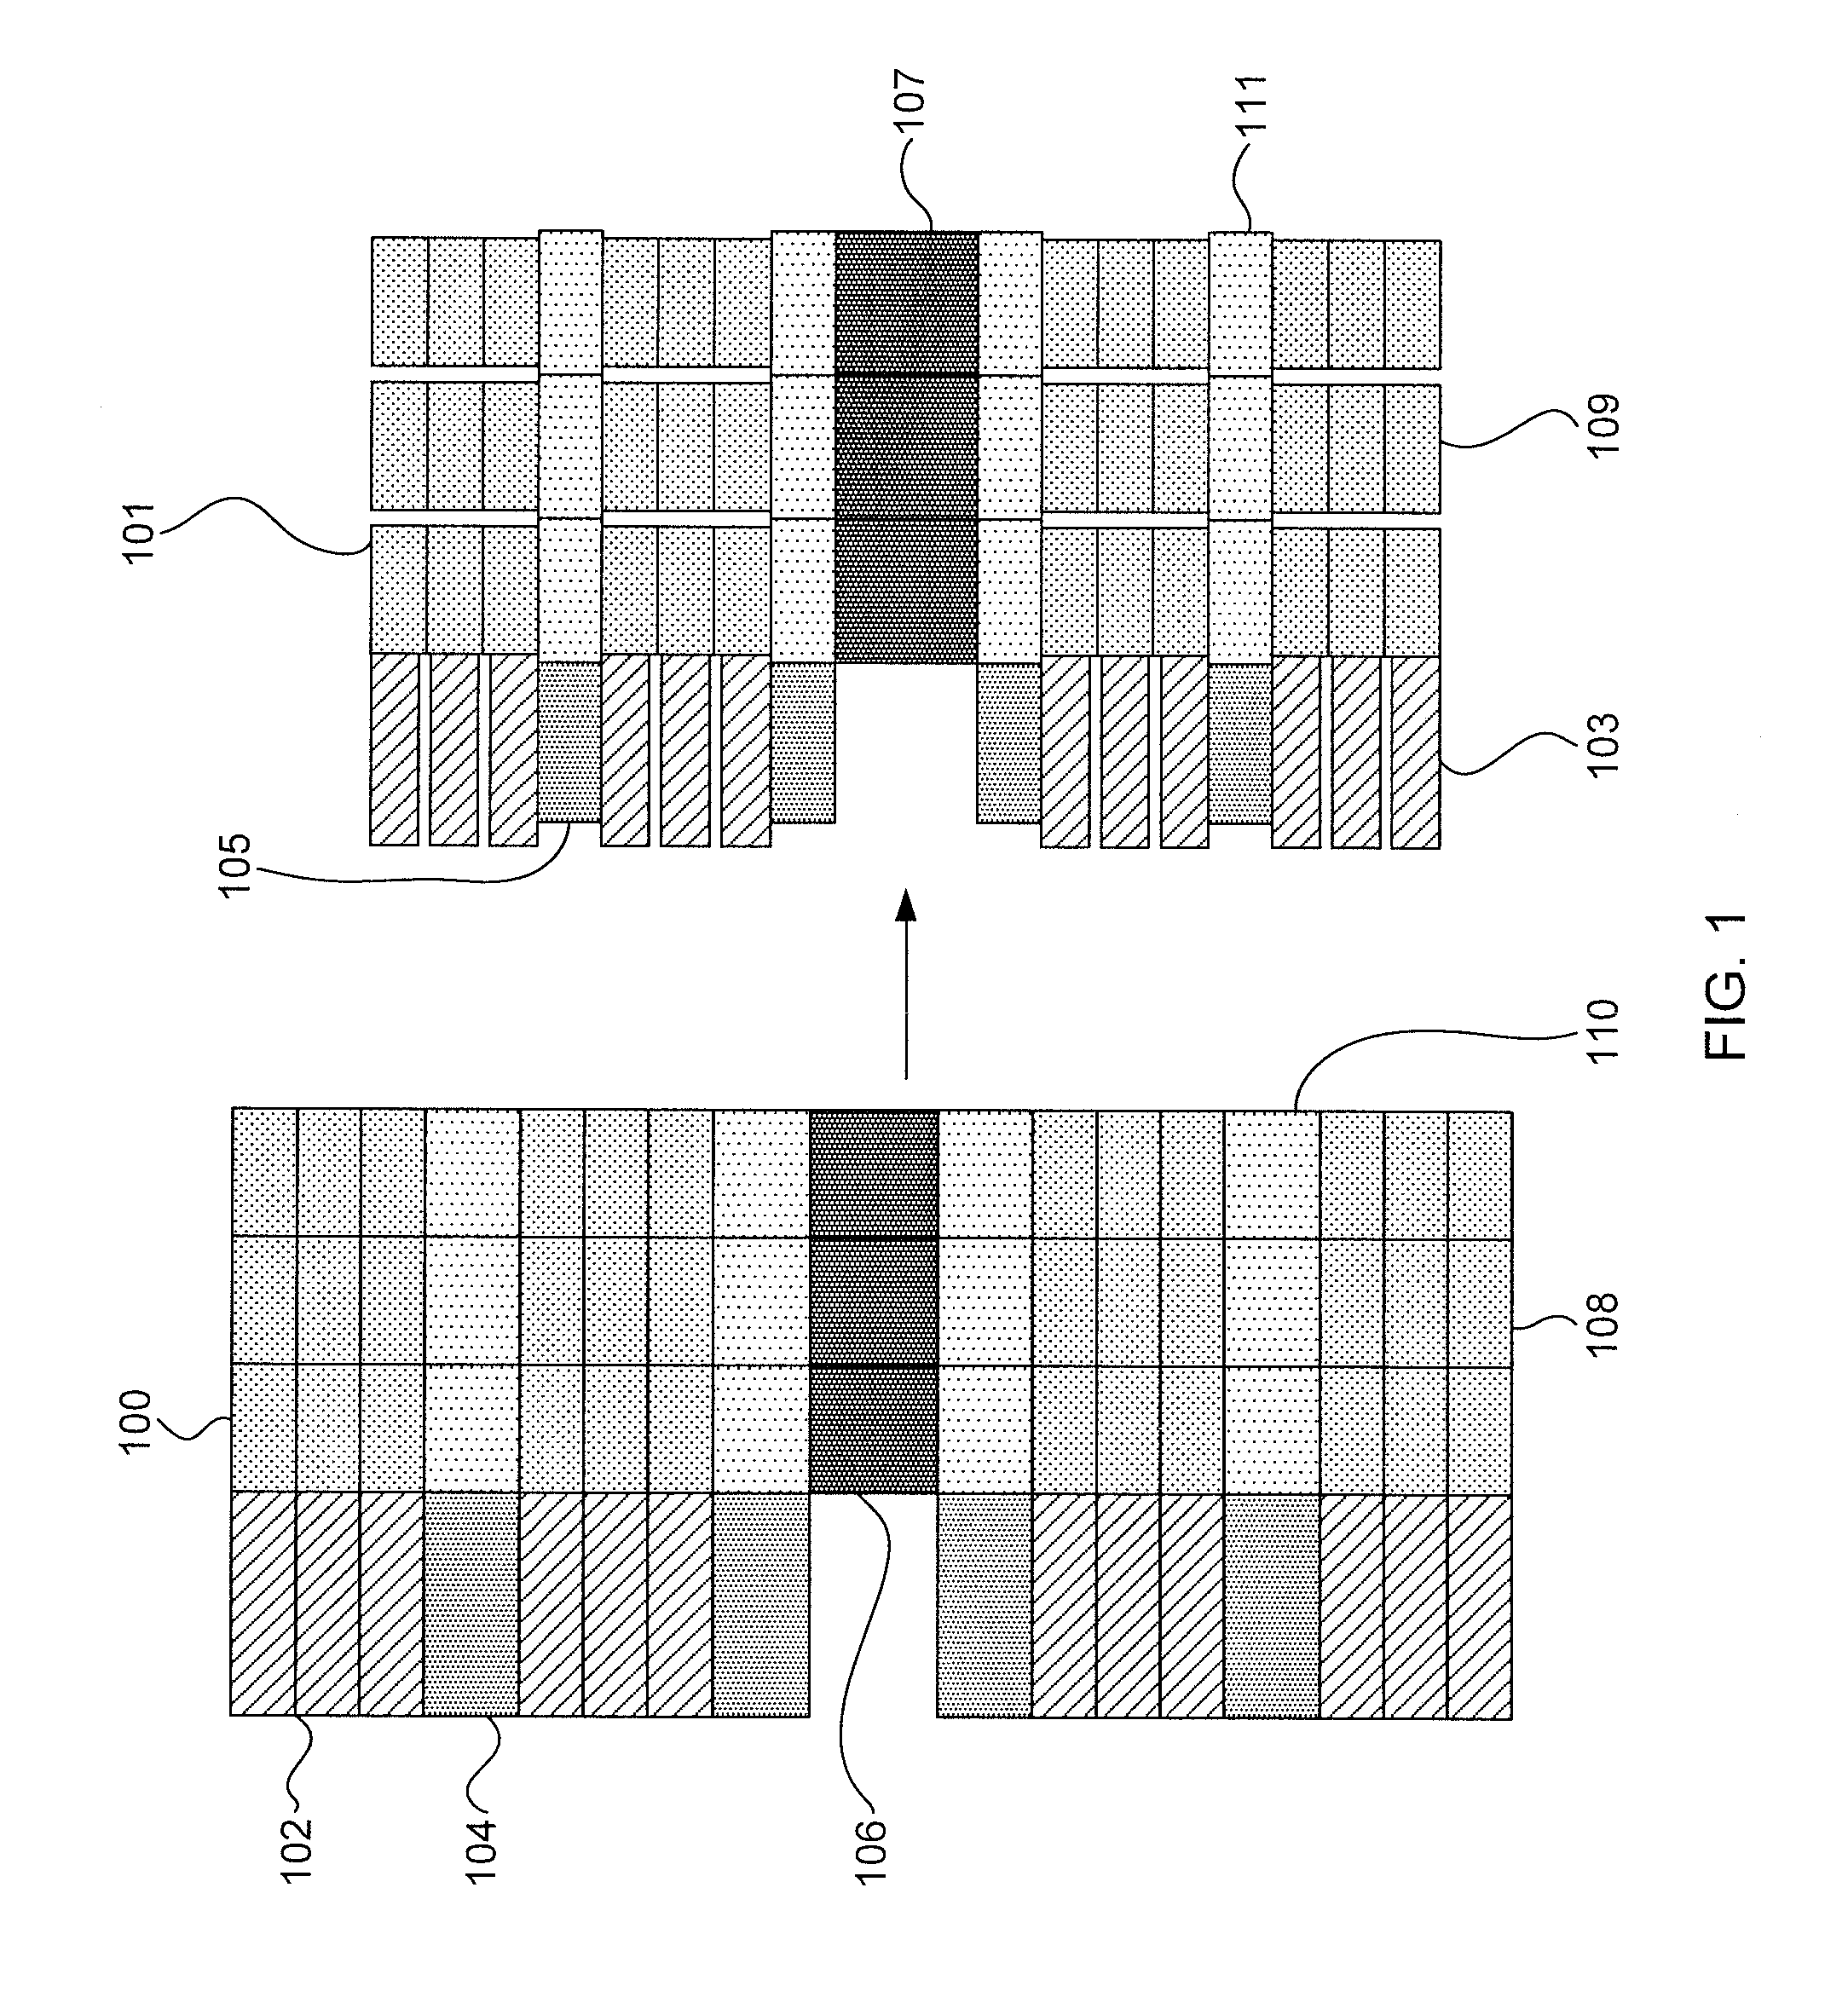 Structural migration of integrated circuit layout